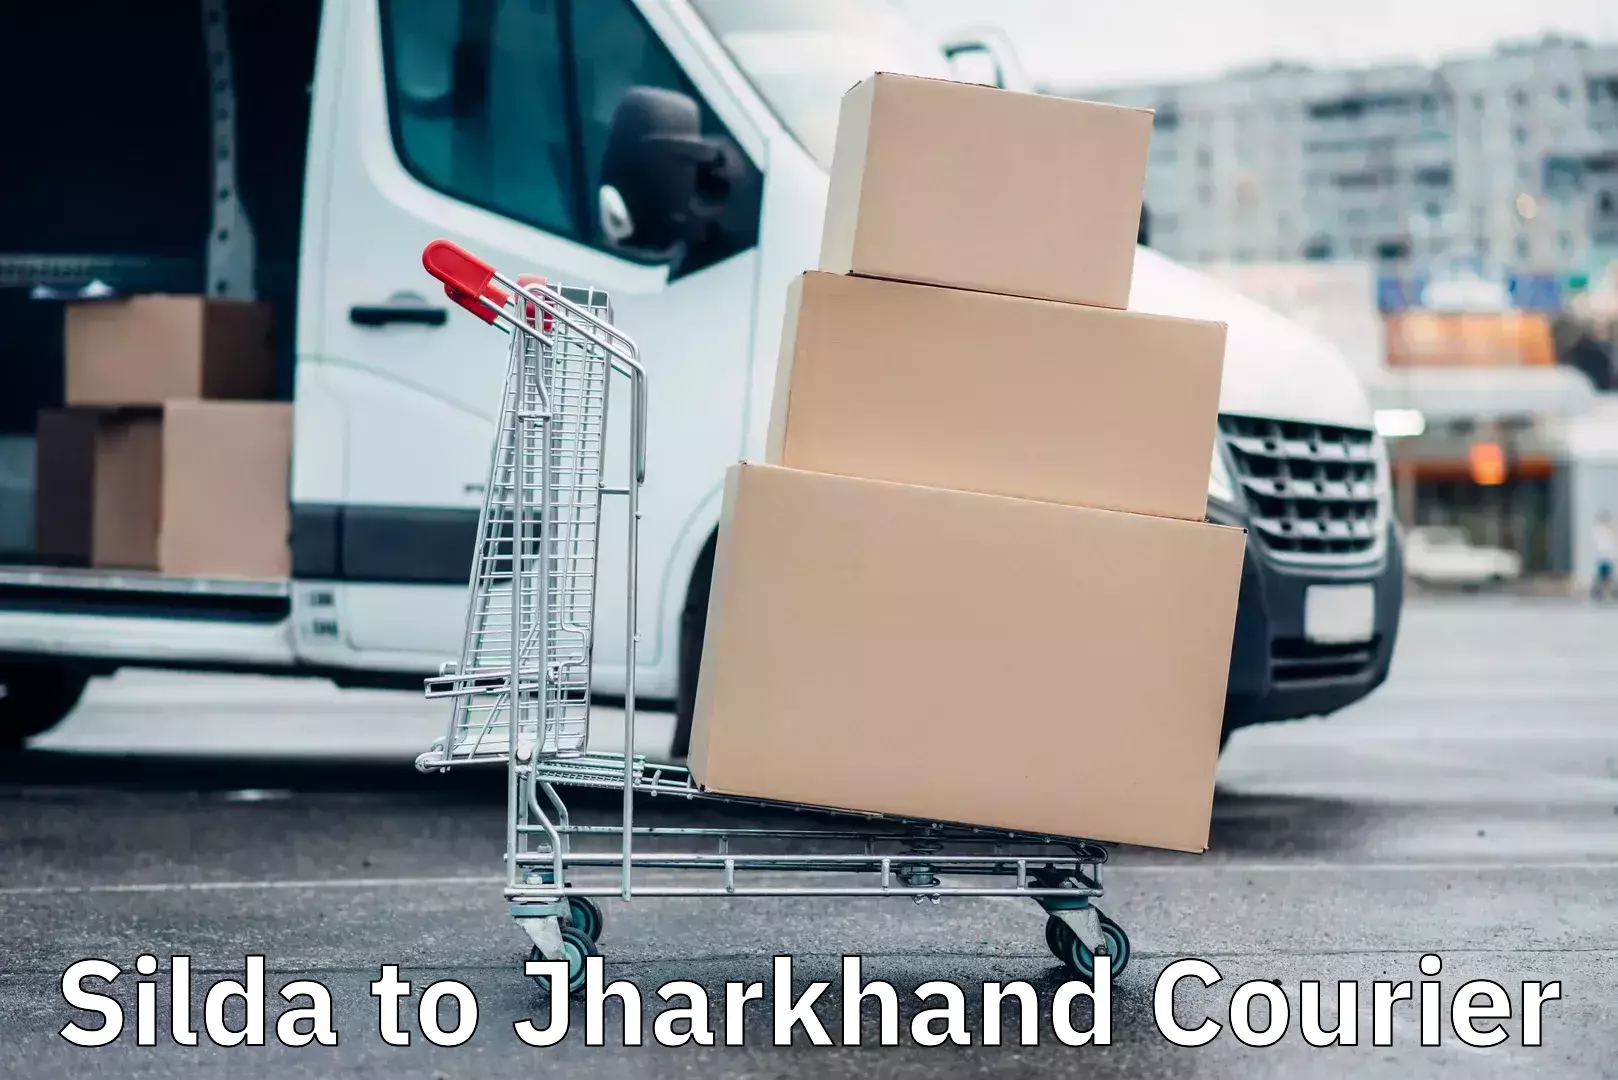 Easy access courier services Silda to Jharkhand